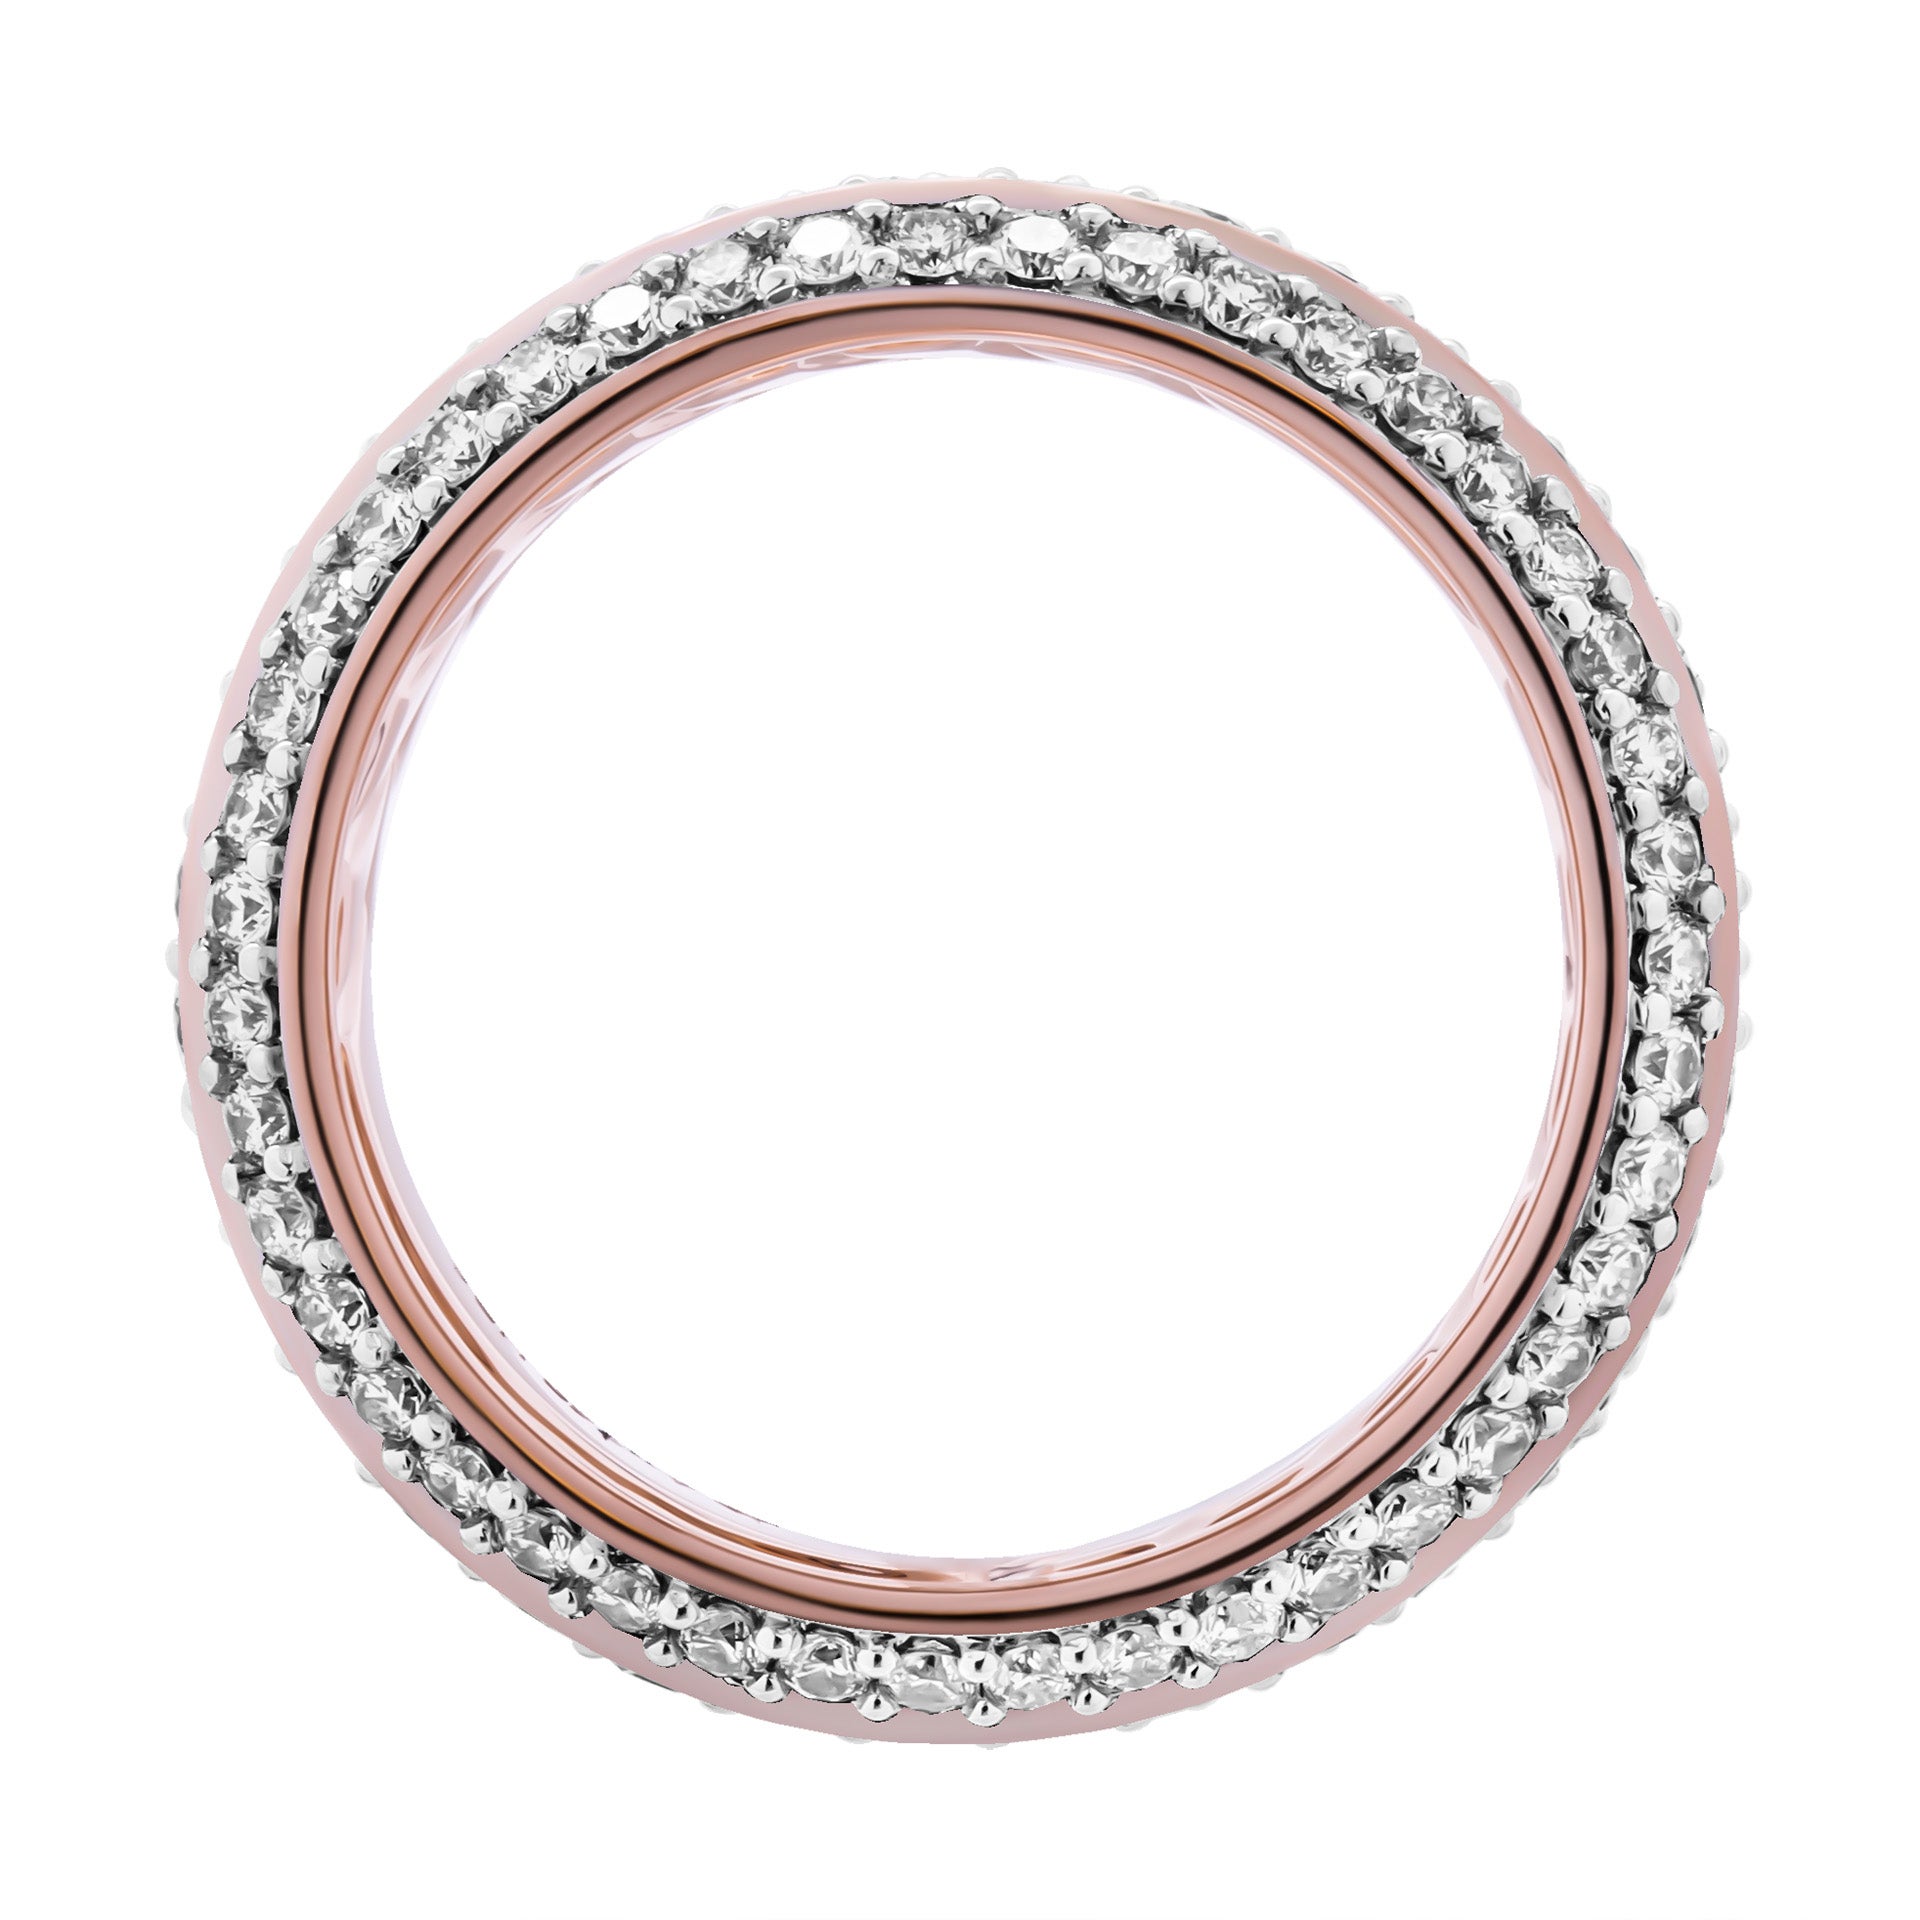 DIAMOND BAND 18K ROSE GOLD
Total Carat Weight: 3.02ct F/G color VS clarity
Size: 7.25 
